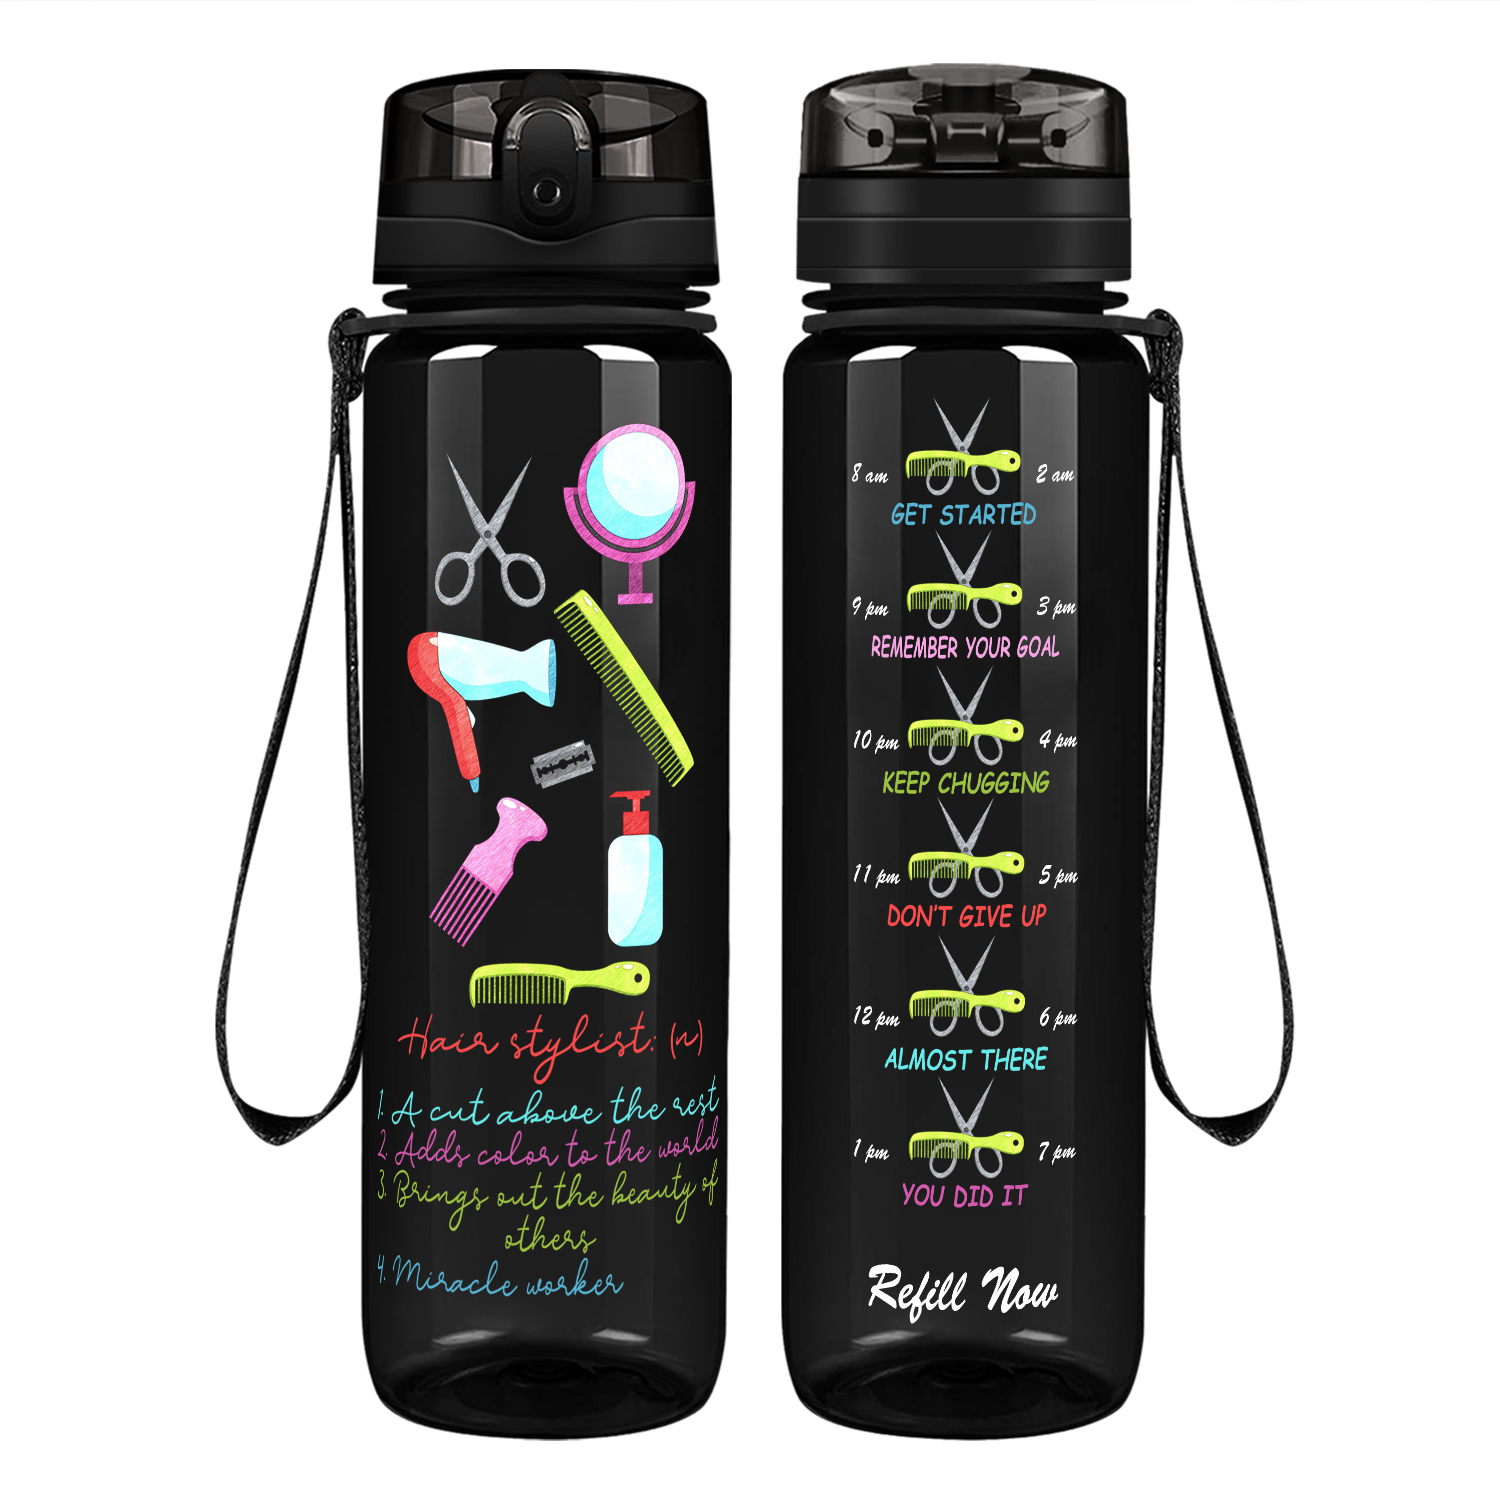 Hairstylist Miracle Worker on 32 oz Motivational Tracking Water Bottle